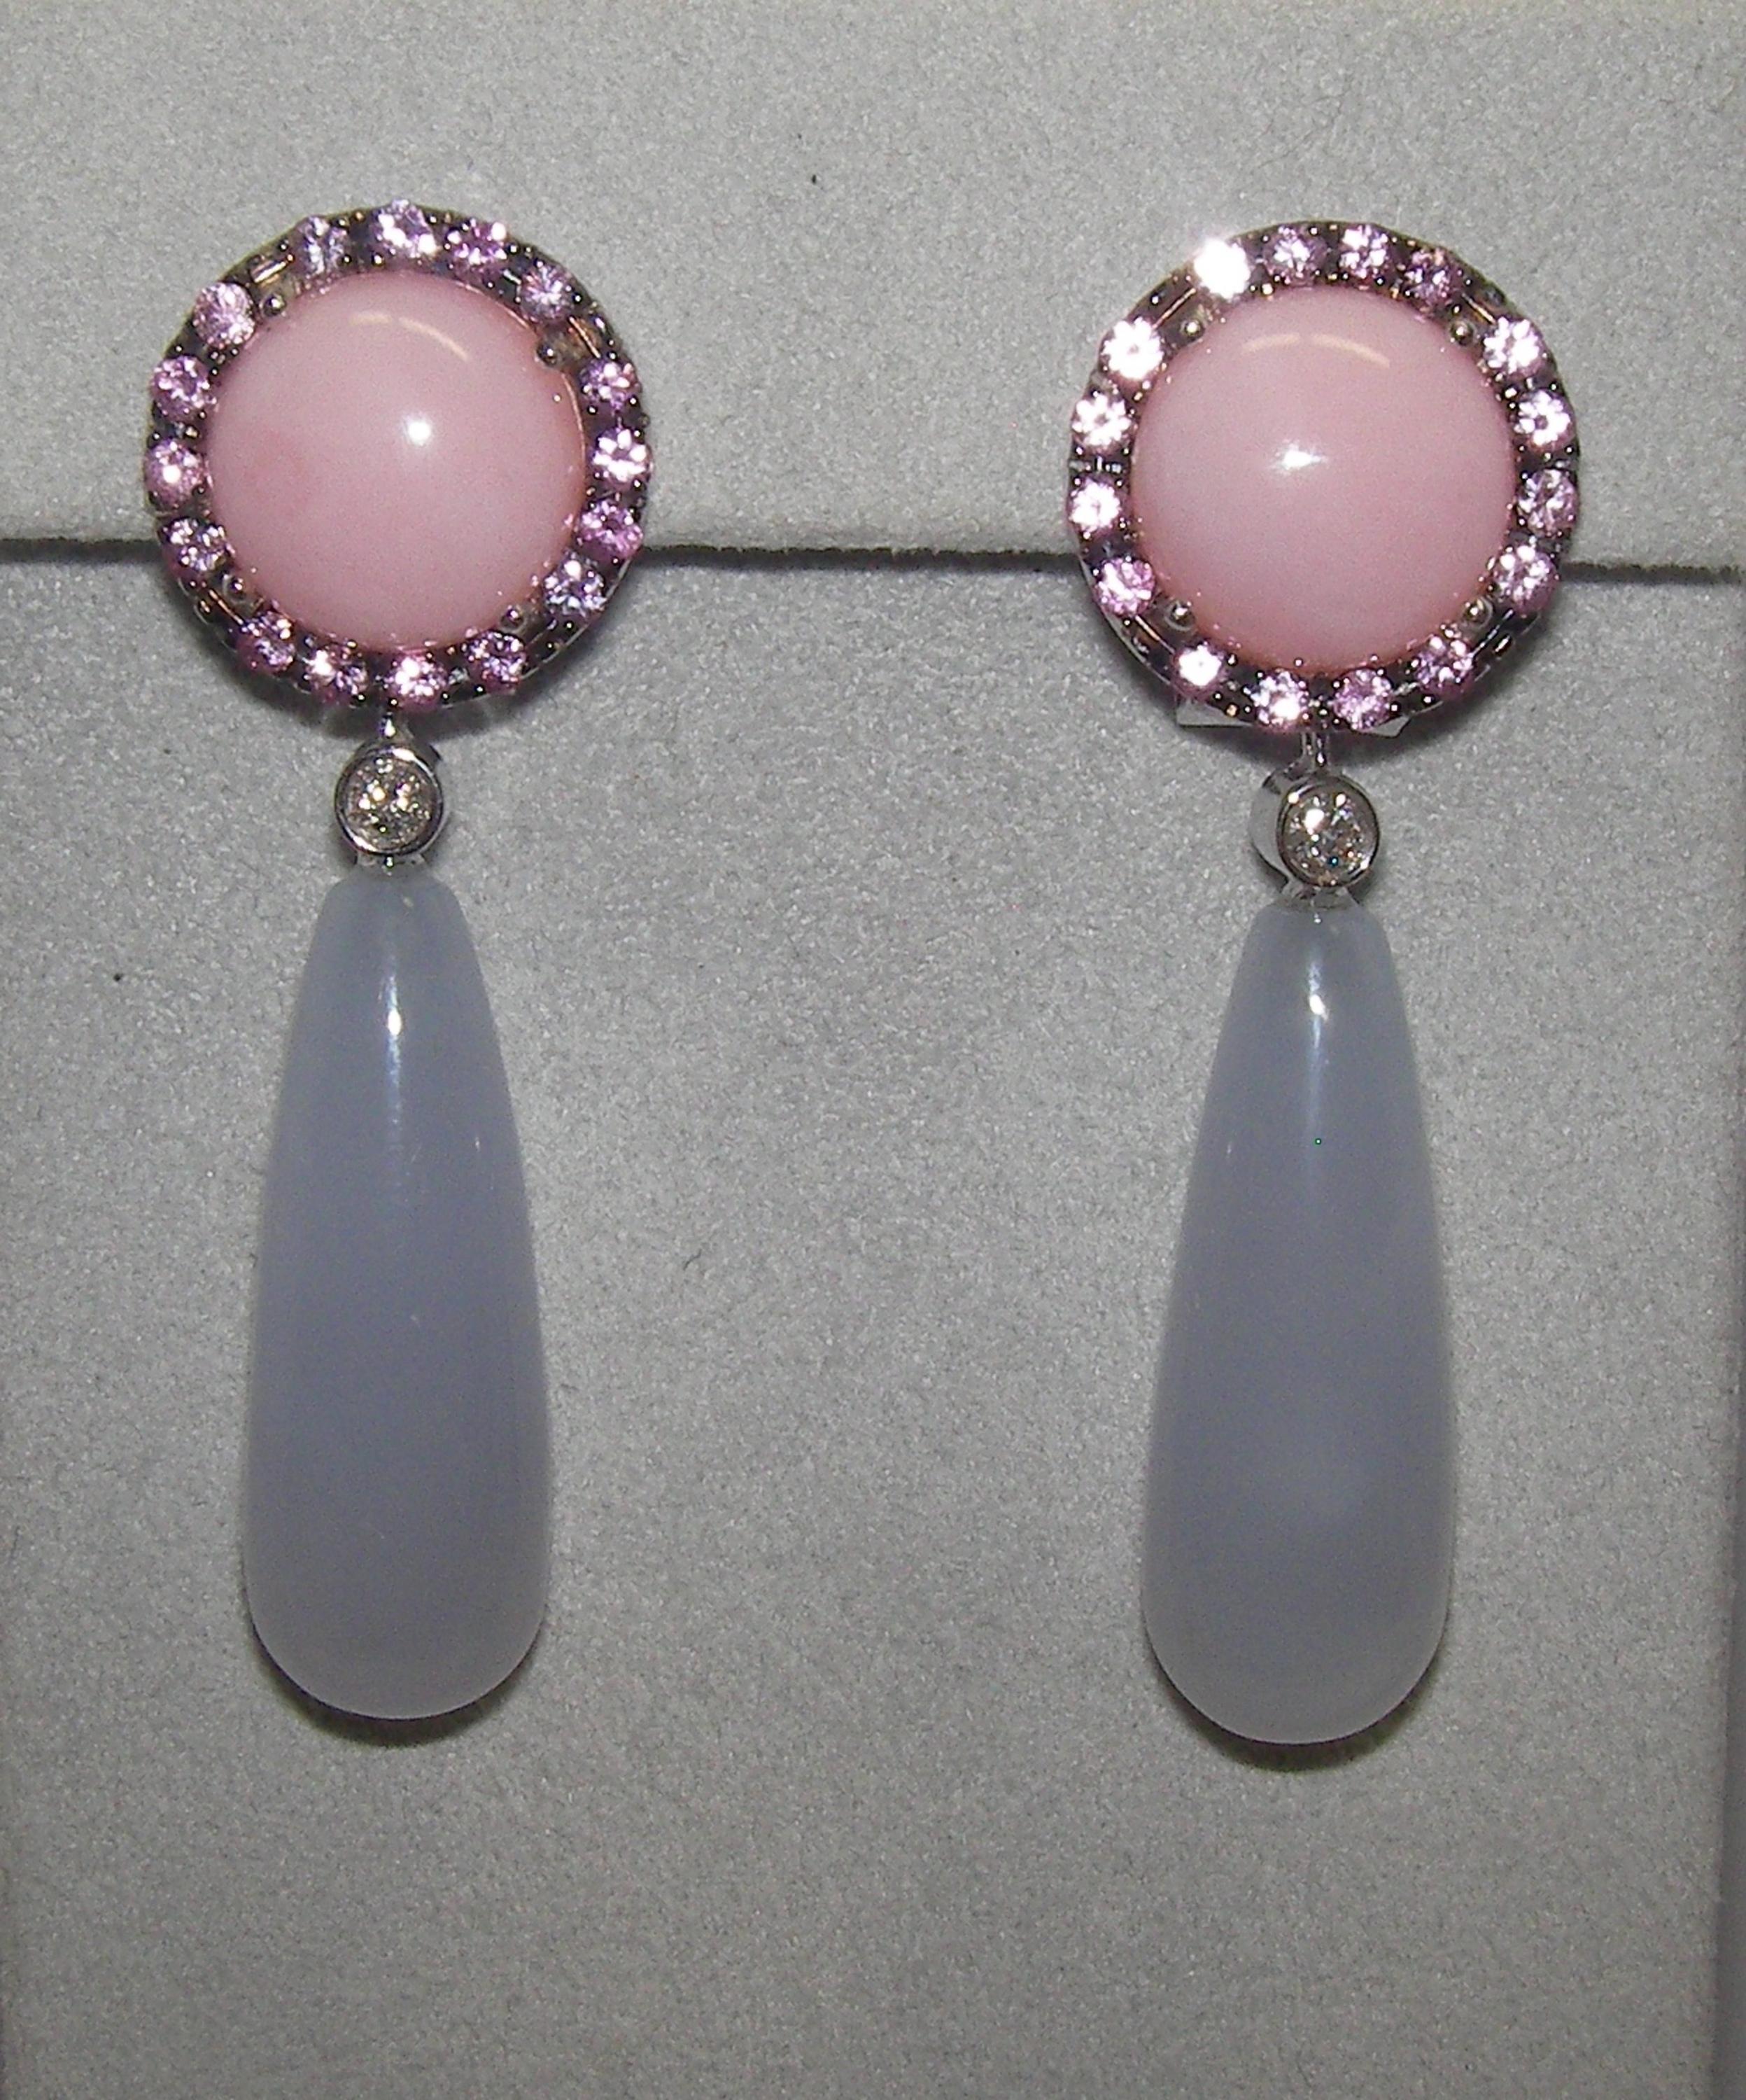 These 18 Karat White Gold Chalcedony Diamond Opal and Sapphire Drop Earrings feature a halo of rose colored Sapphires and Diamonds around a round cabochon Rose Opal center stone. The base is then followed by a hanging pear shaped cabochon, separated